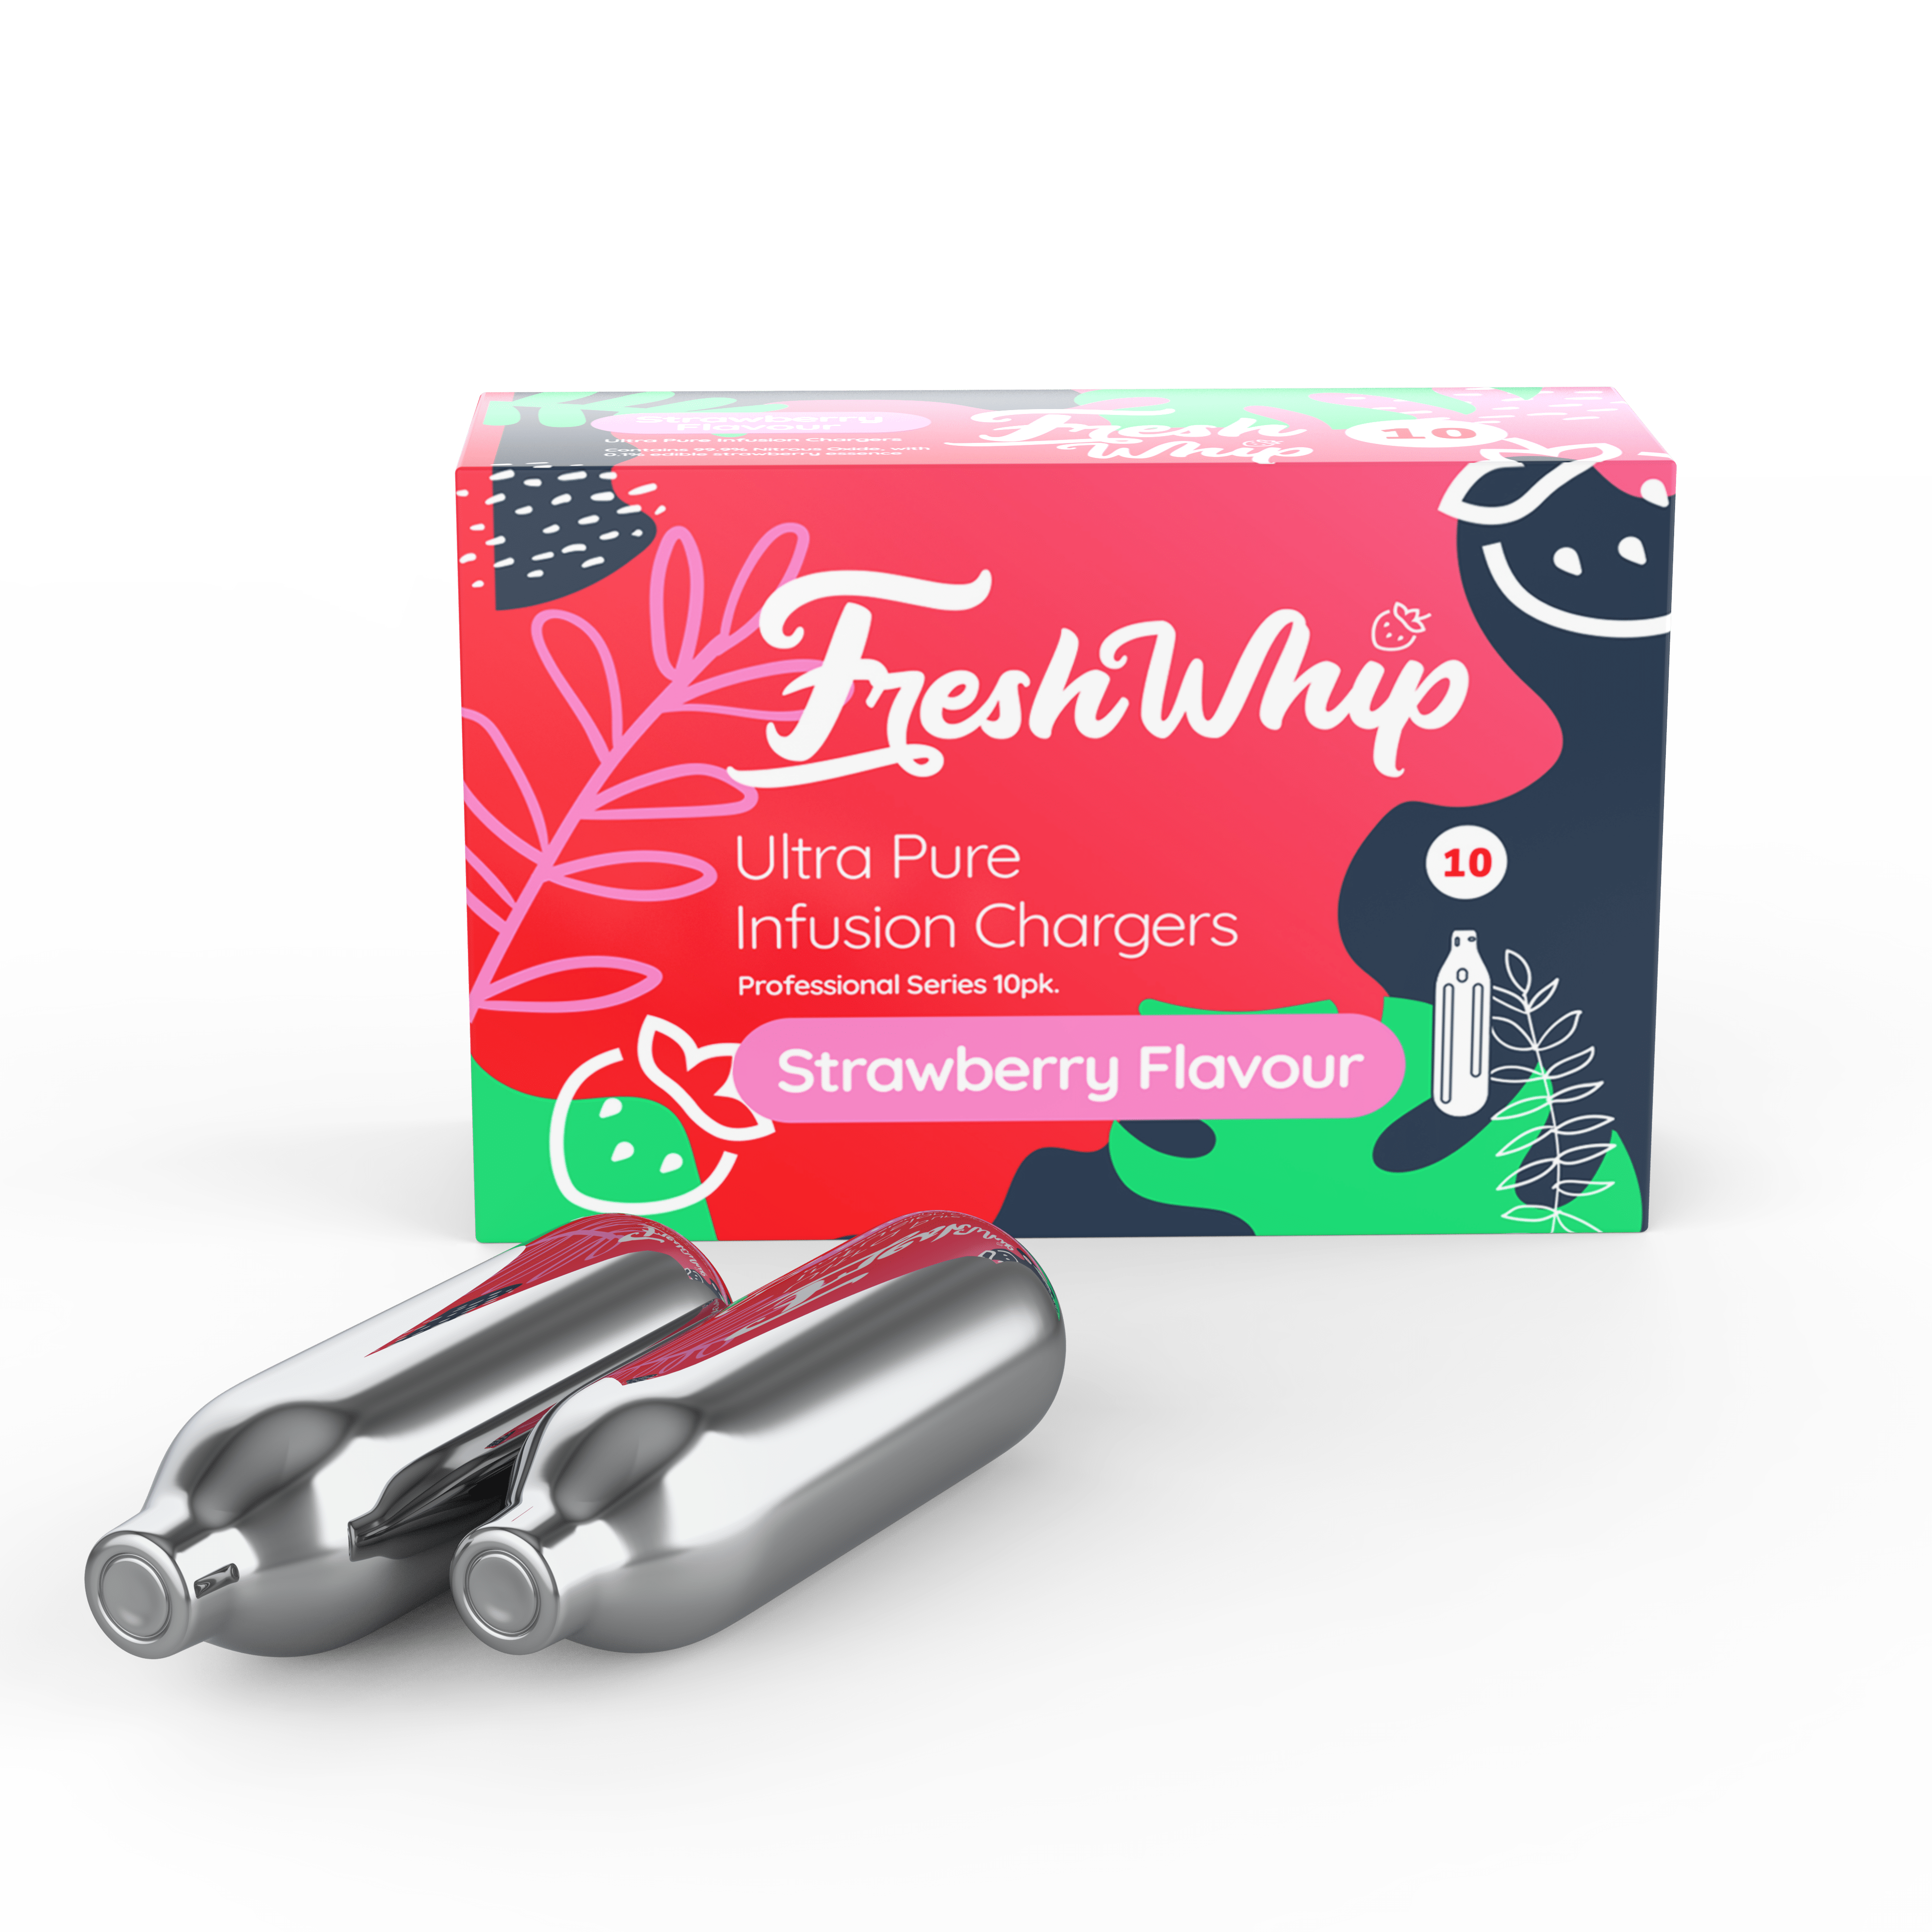 FreshWhip STRAWBERRY Infusion Chargers 8.2g – 10pks